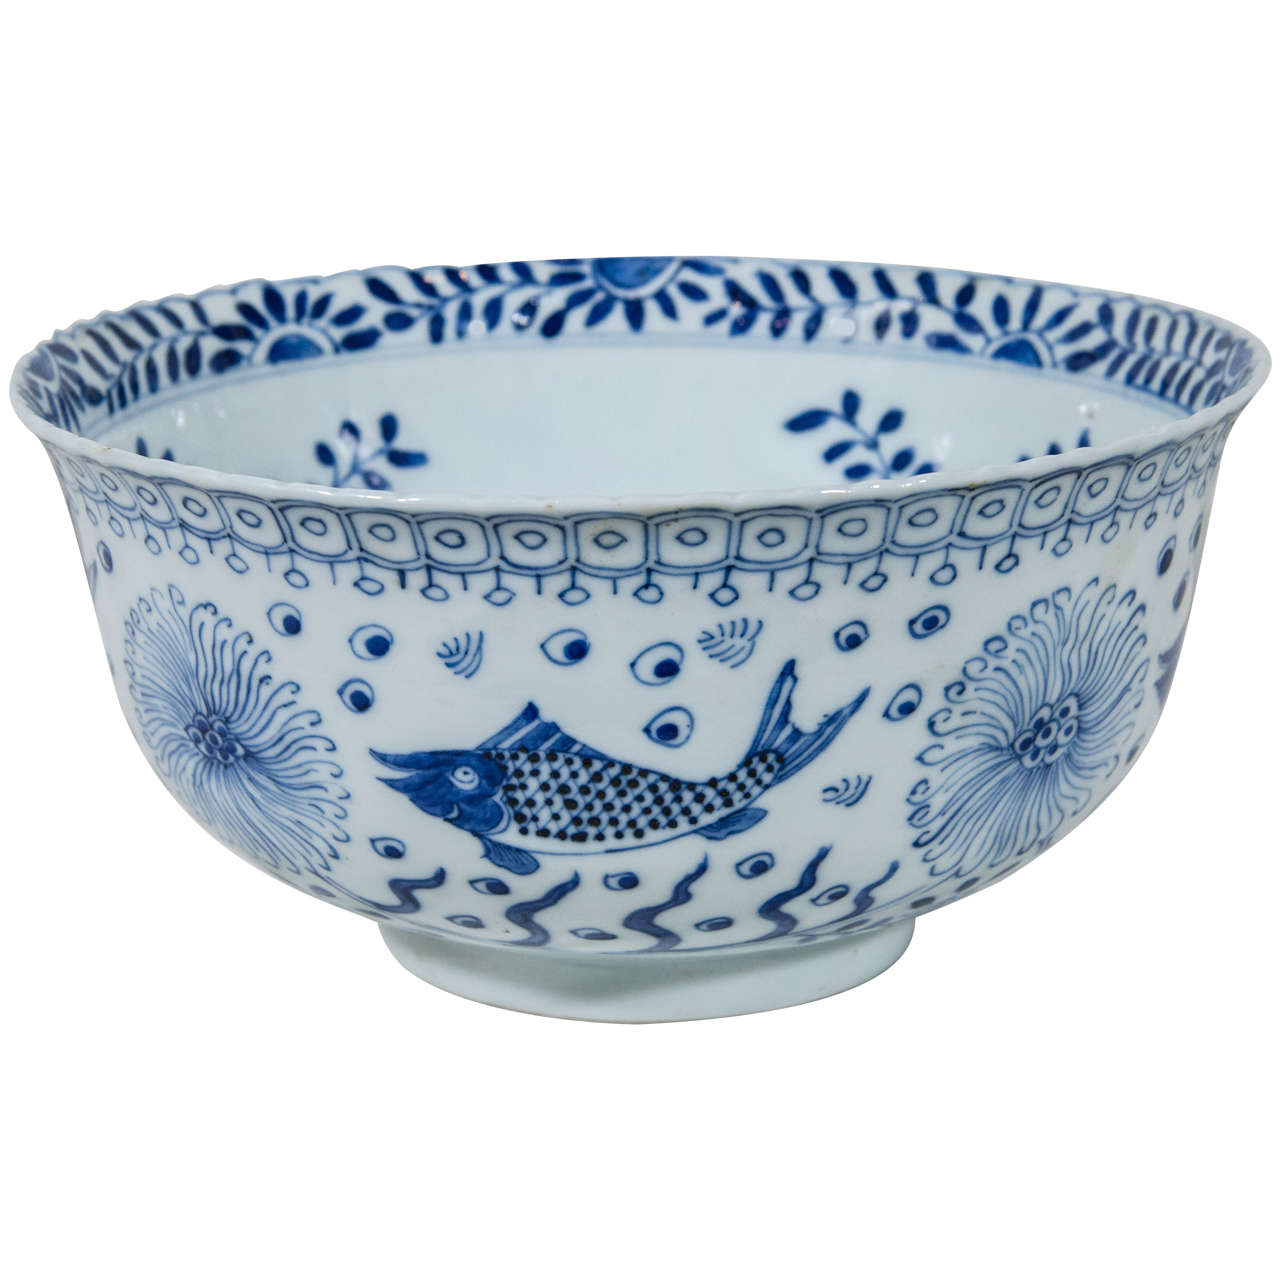 Chinese Blue and White Bowl with Fish